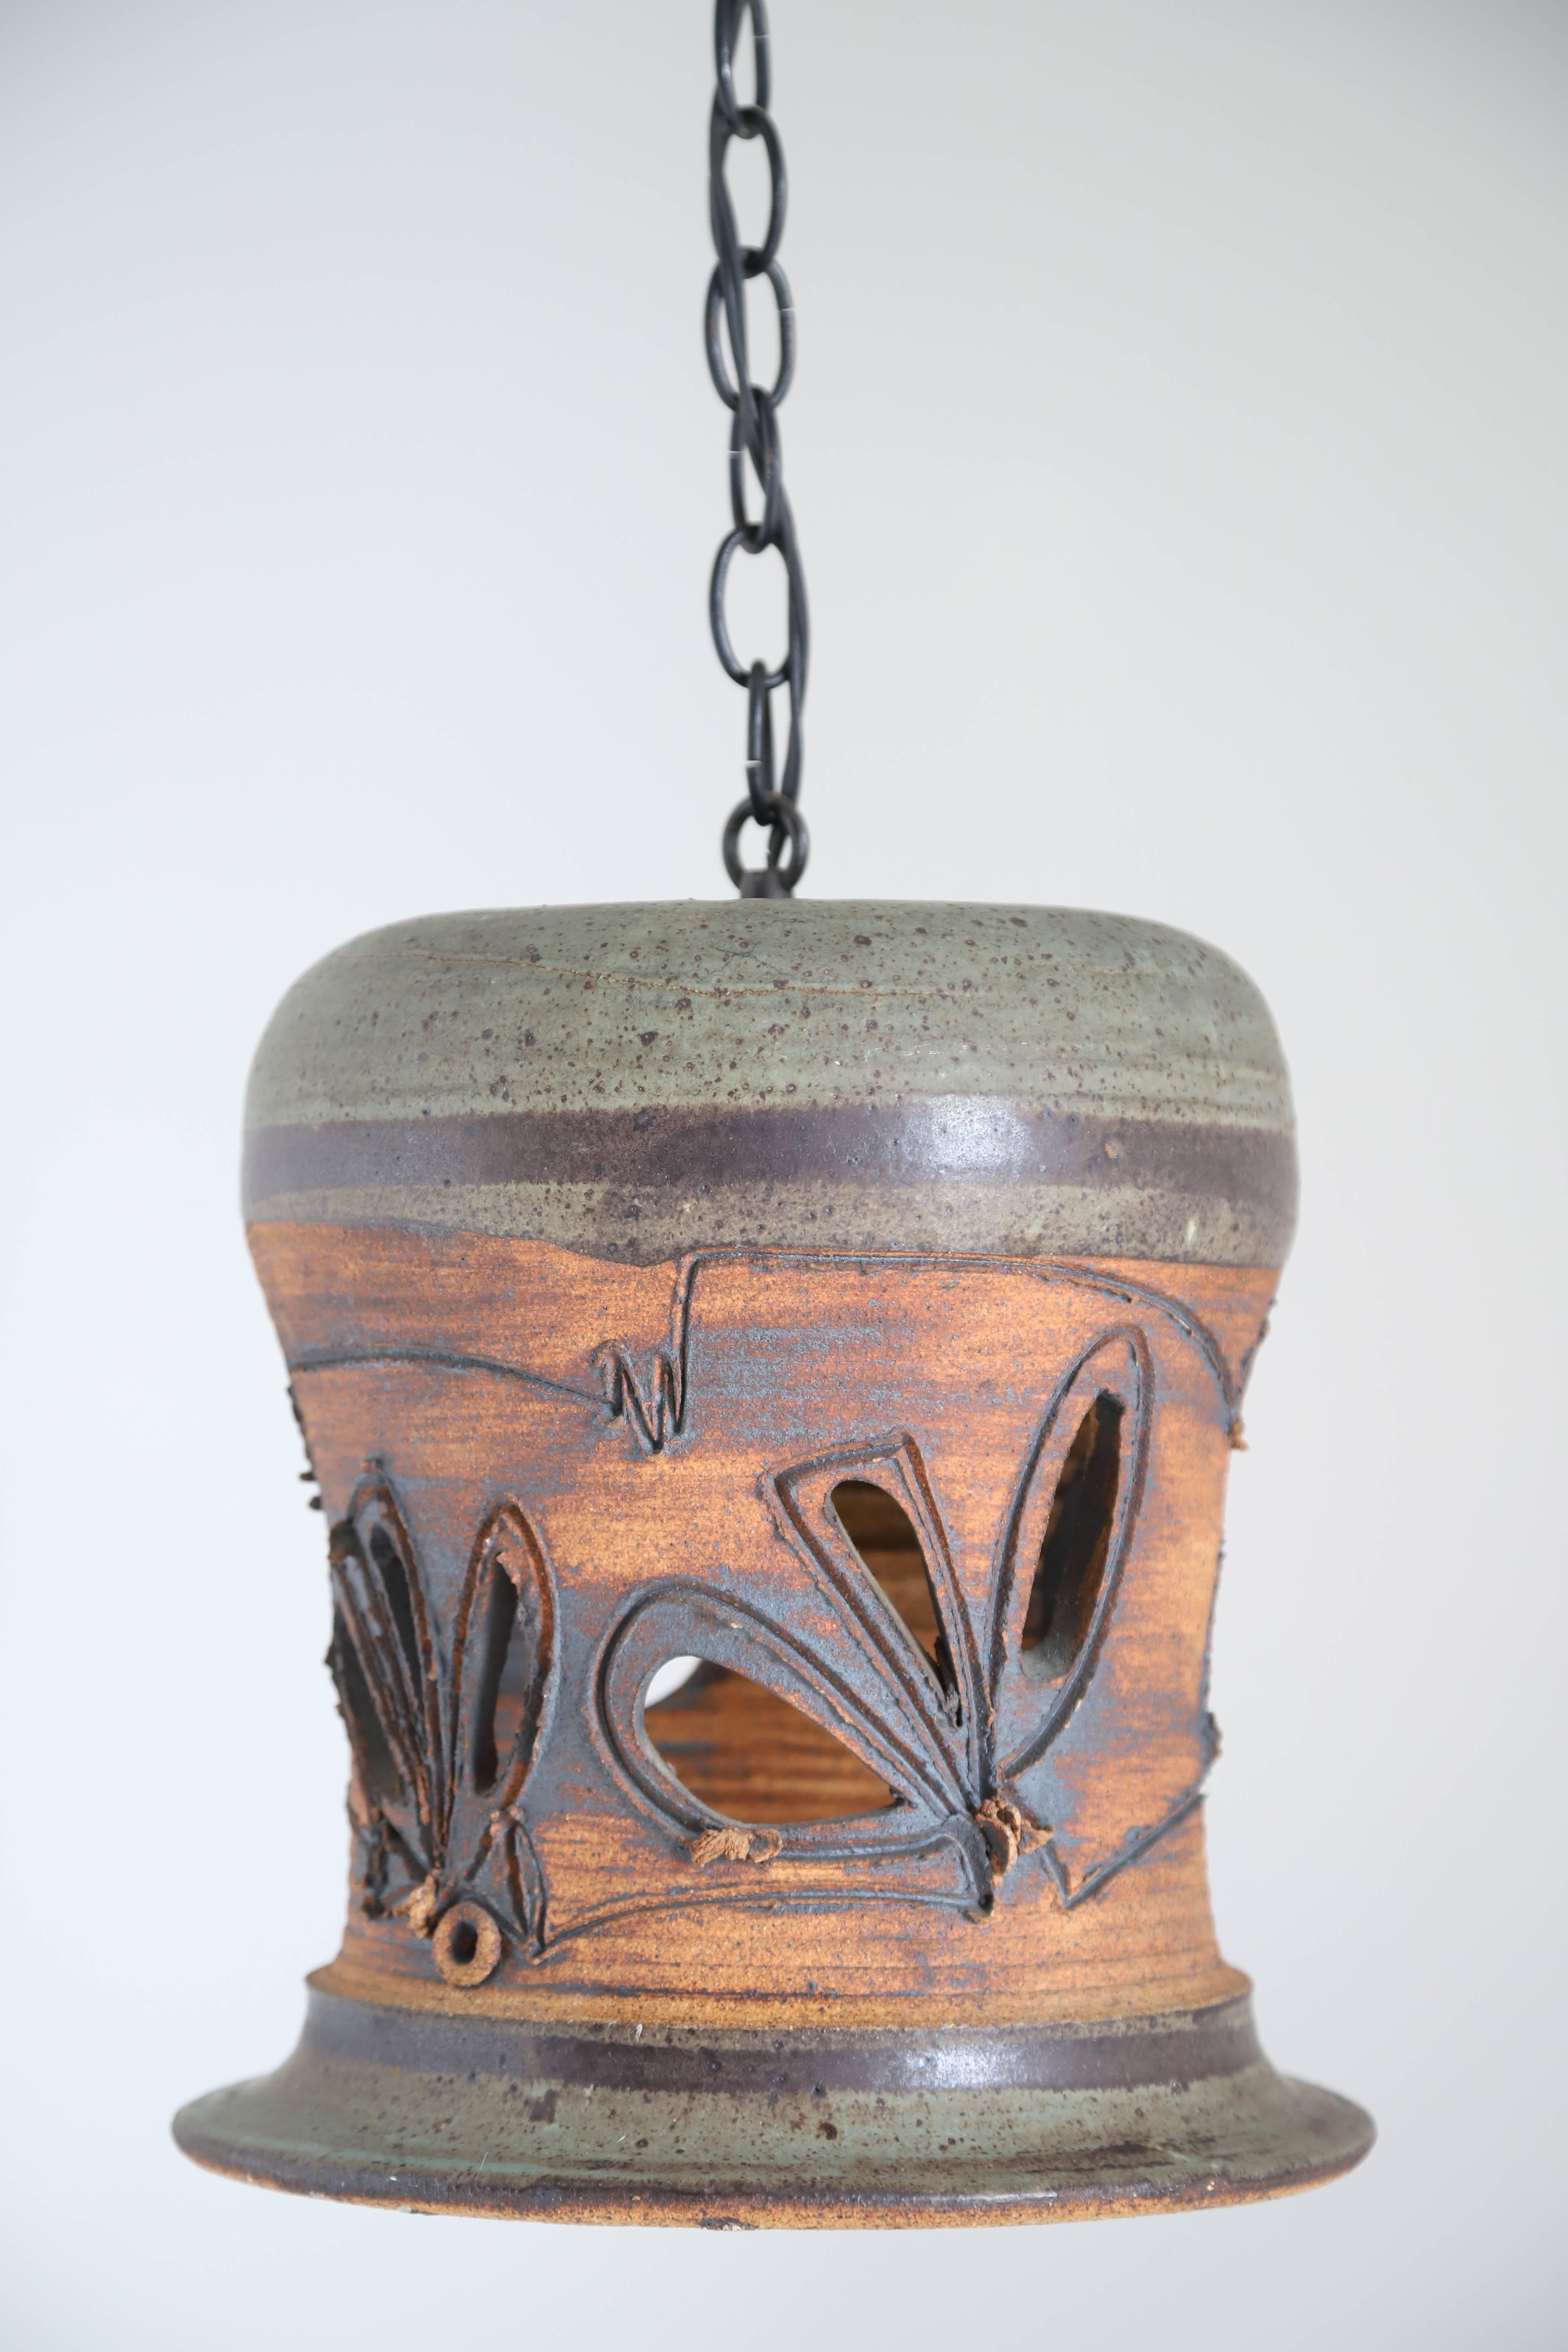 The hand thrown ceramic hanging light is a stunning blend of artisanal craftsmanship and functional design. Meticulously created on a potter's wheel, this unique piece showcases the skill and artistry of a ceramic artist.

The light's ceramic body